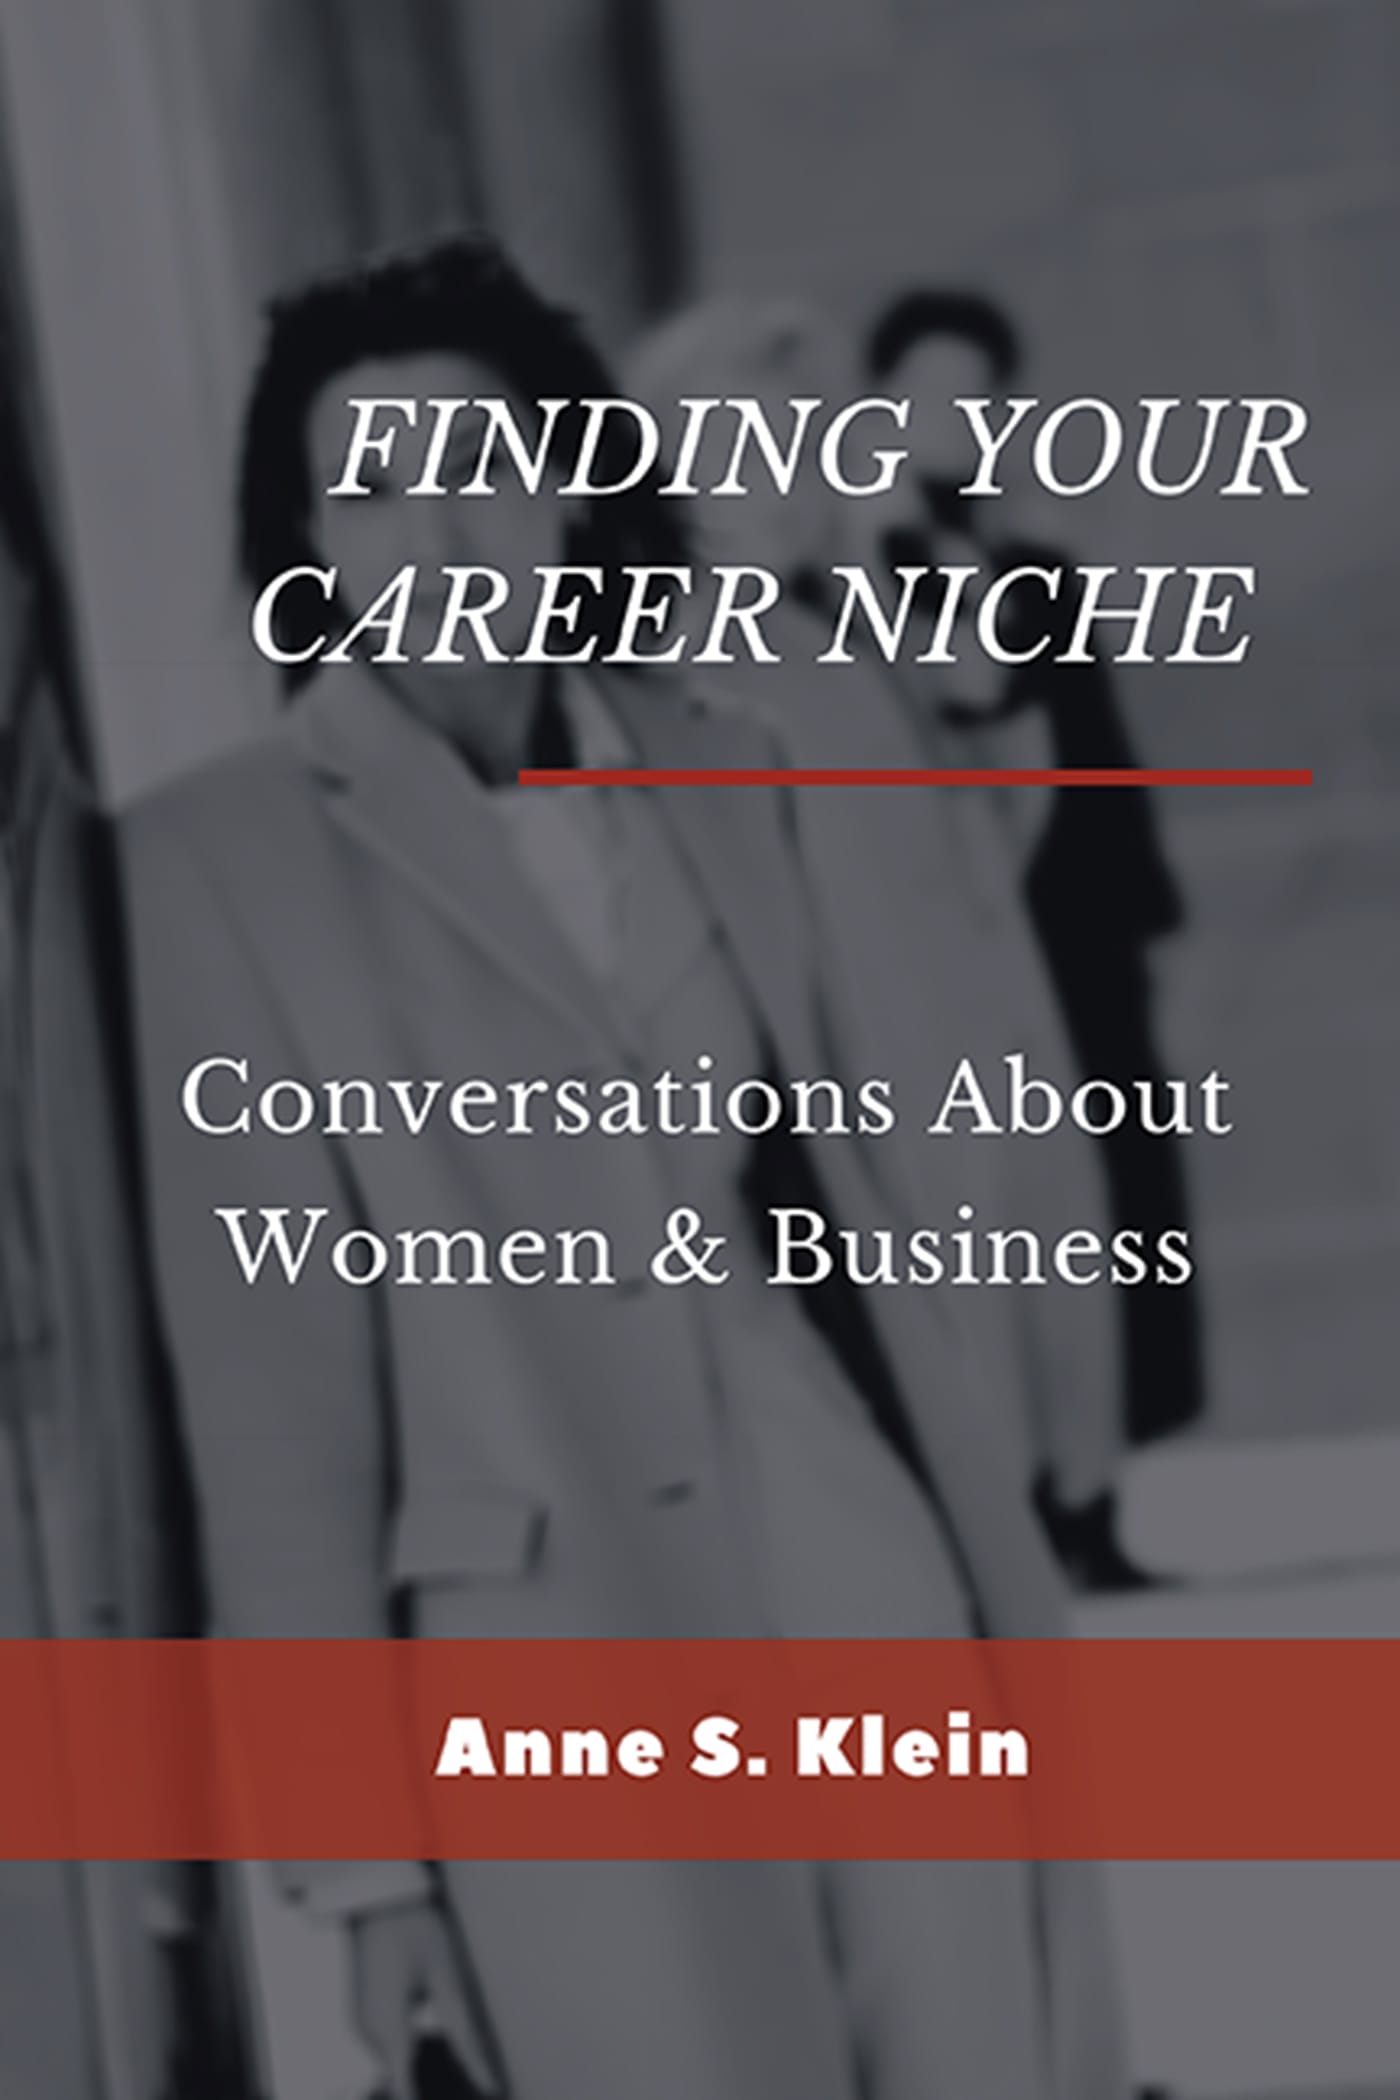 Book titled Finding Your Career Niche